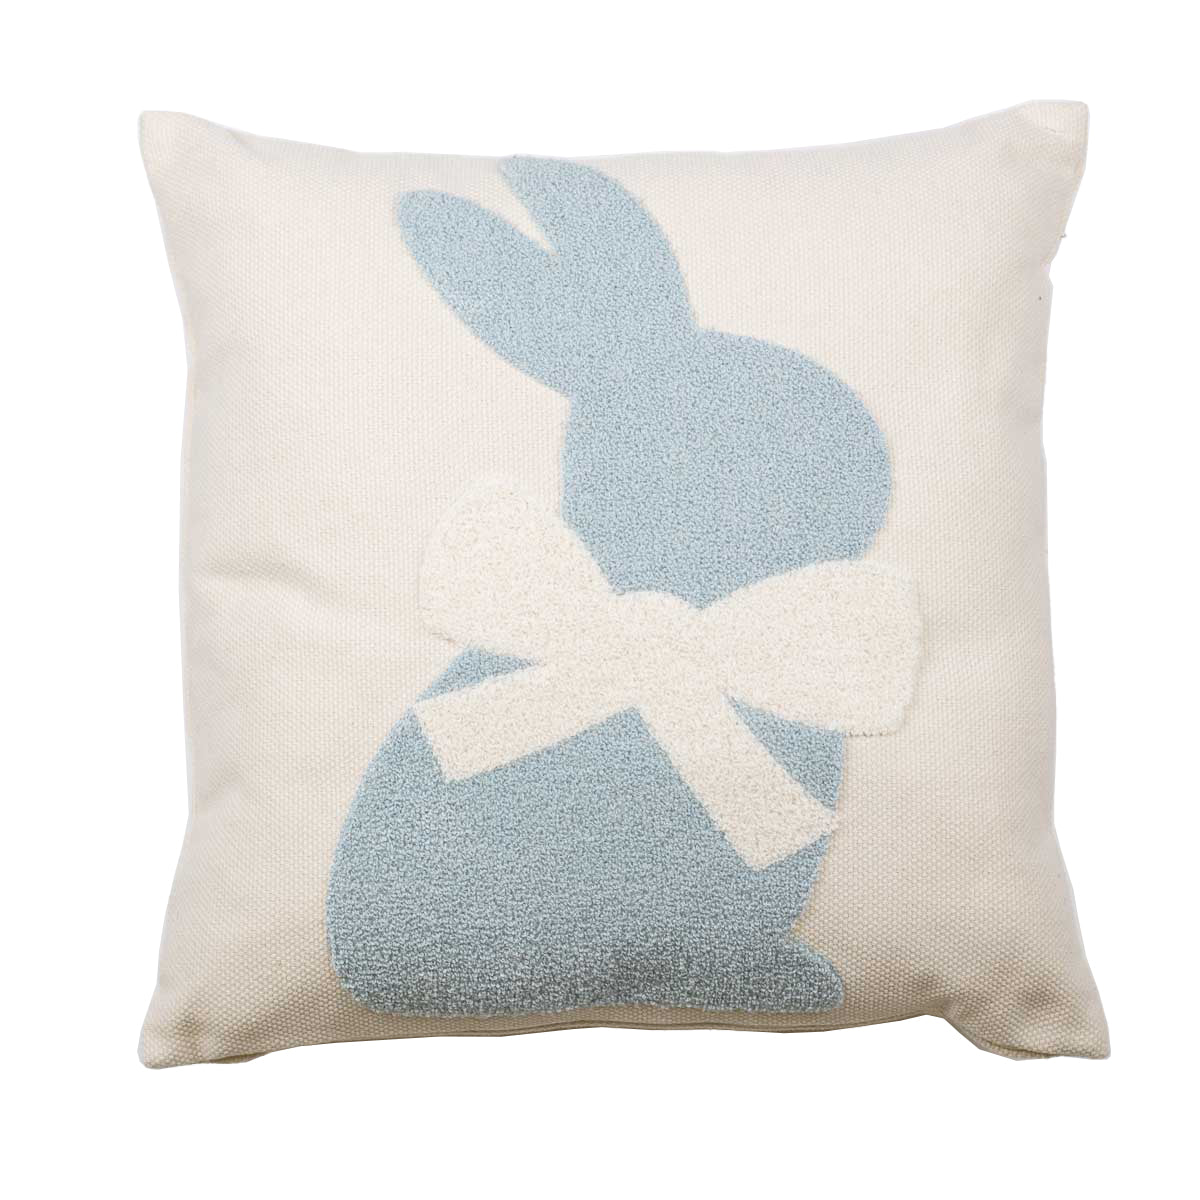 Embroidered Bunny Pillow